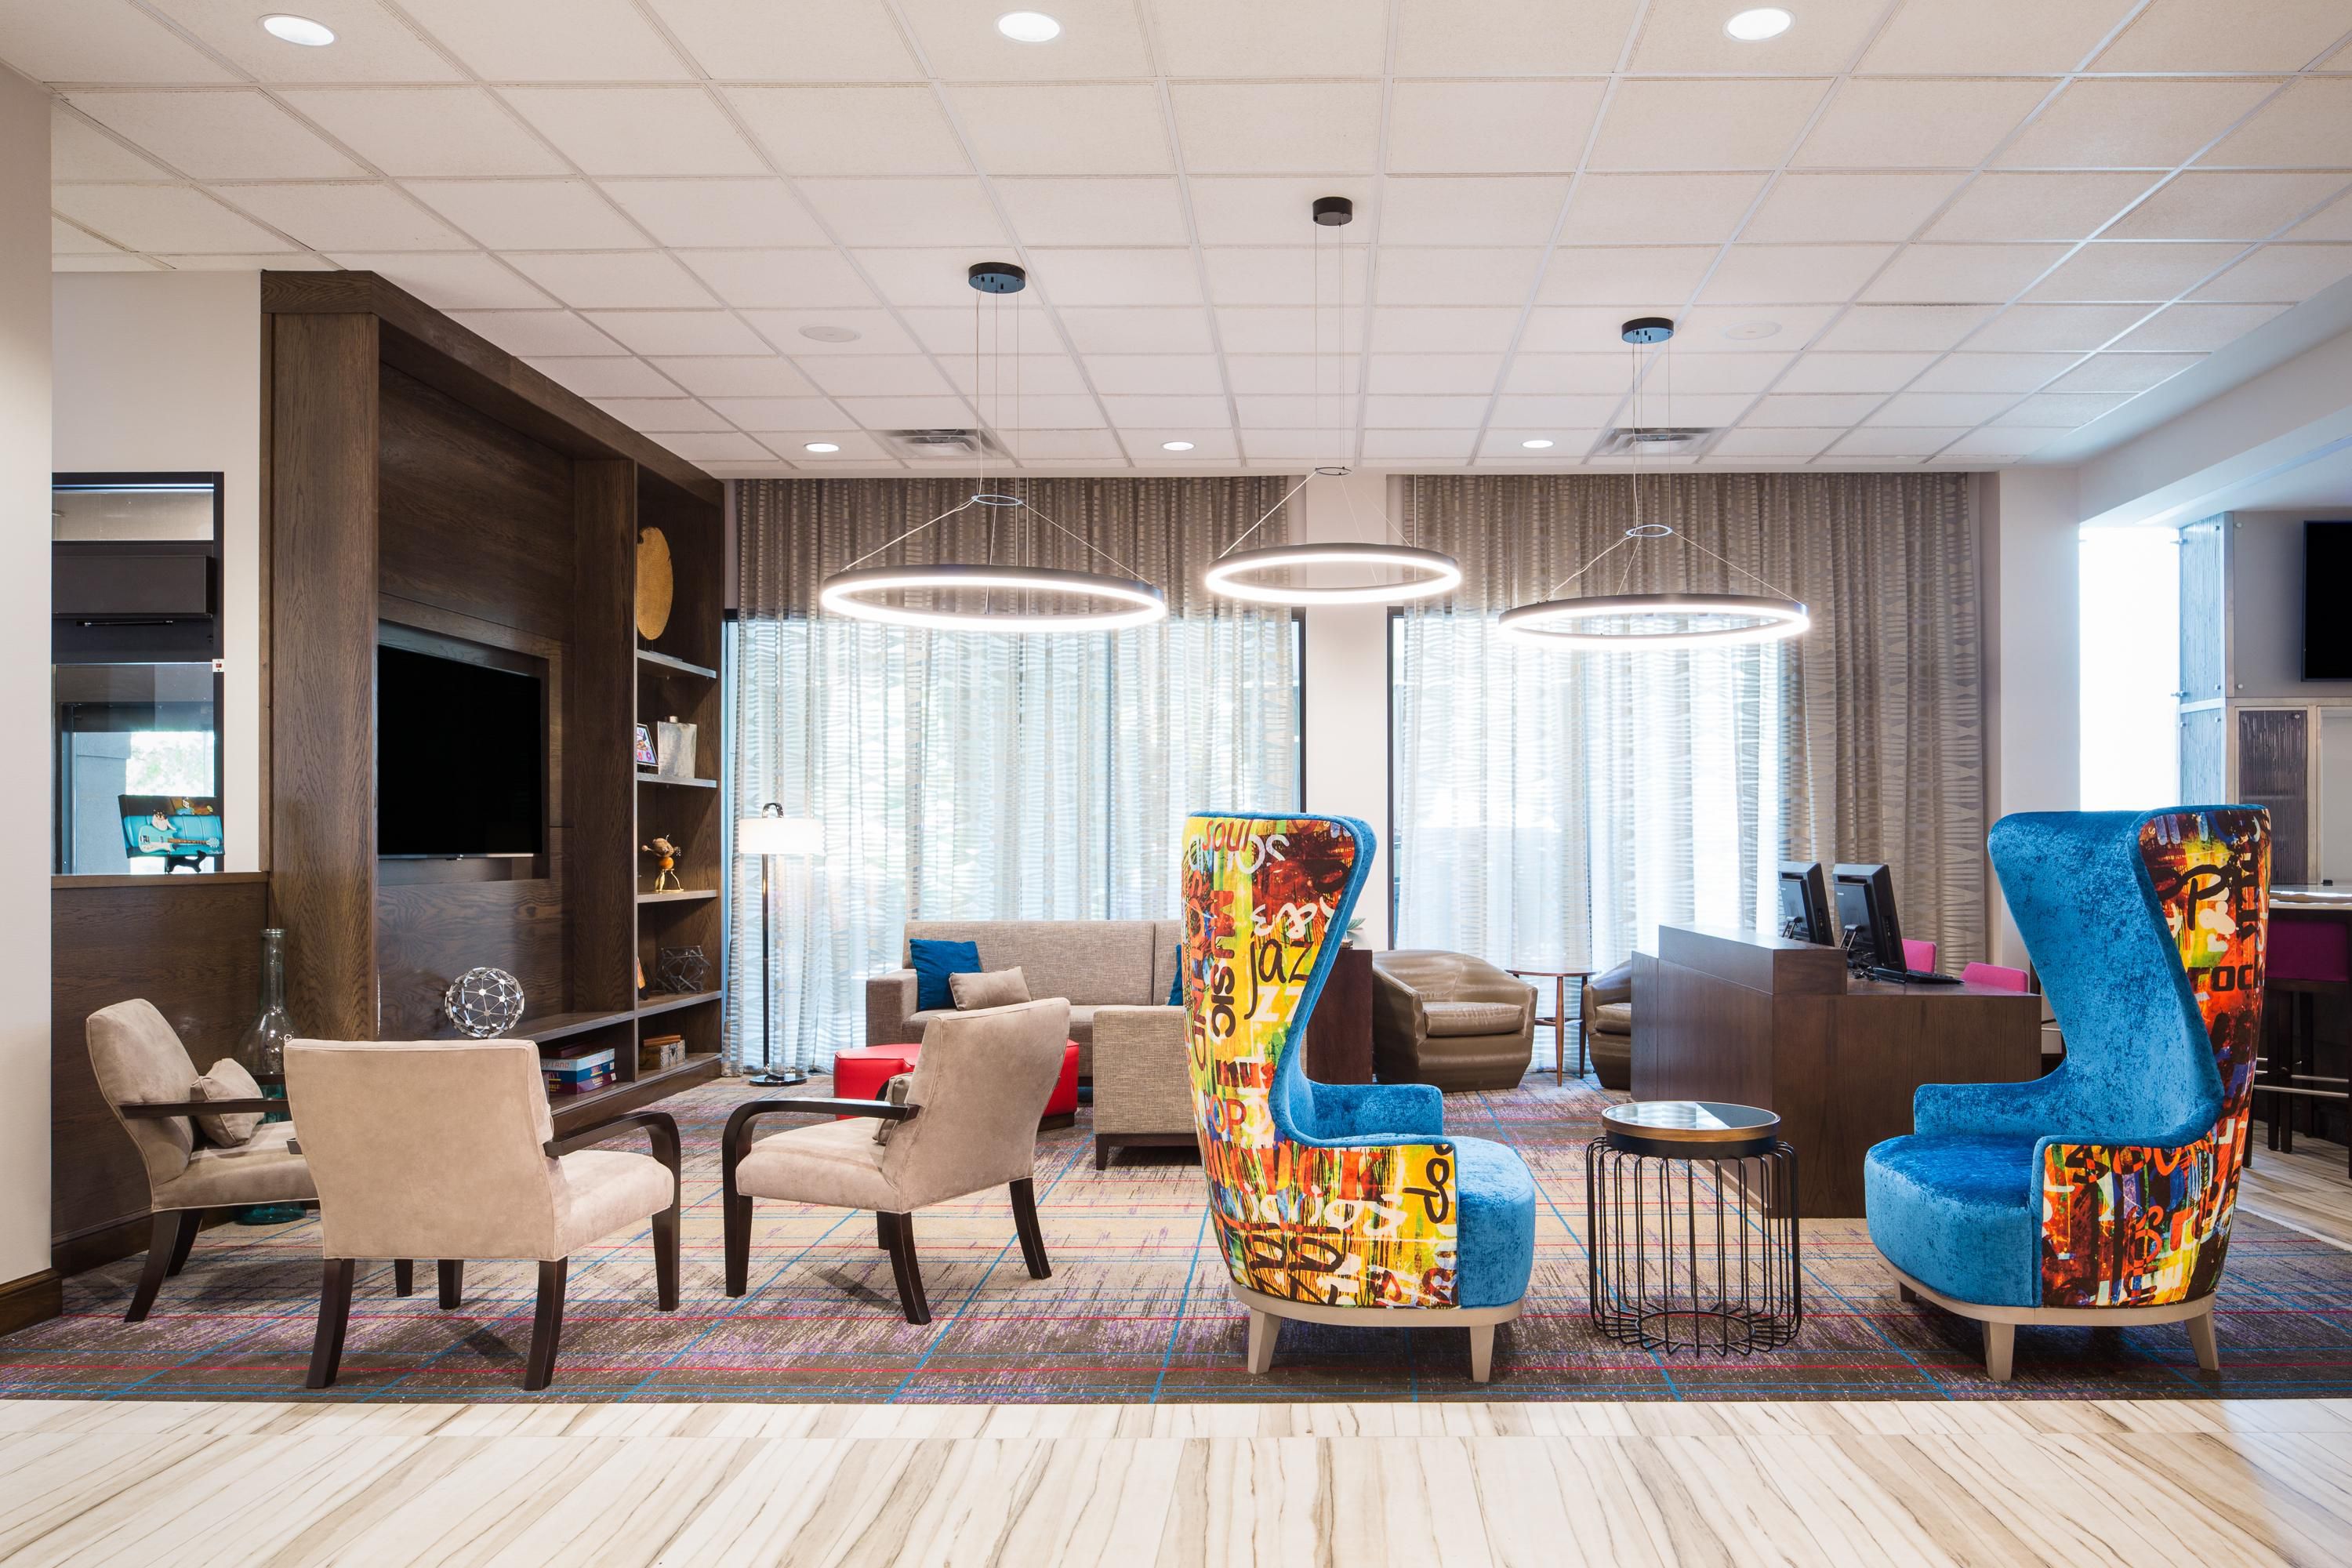 Our blues themed hotel is your perfect stop in downtown Memphis